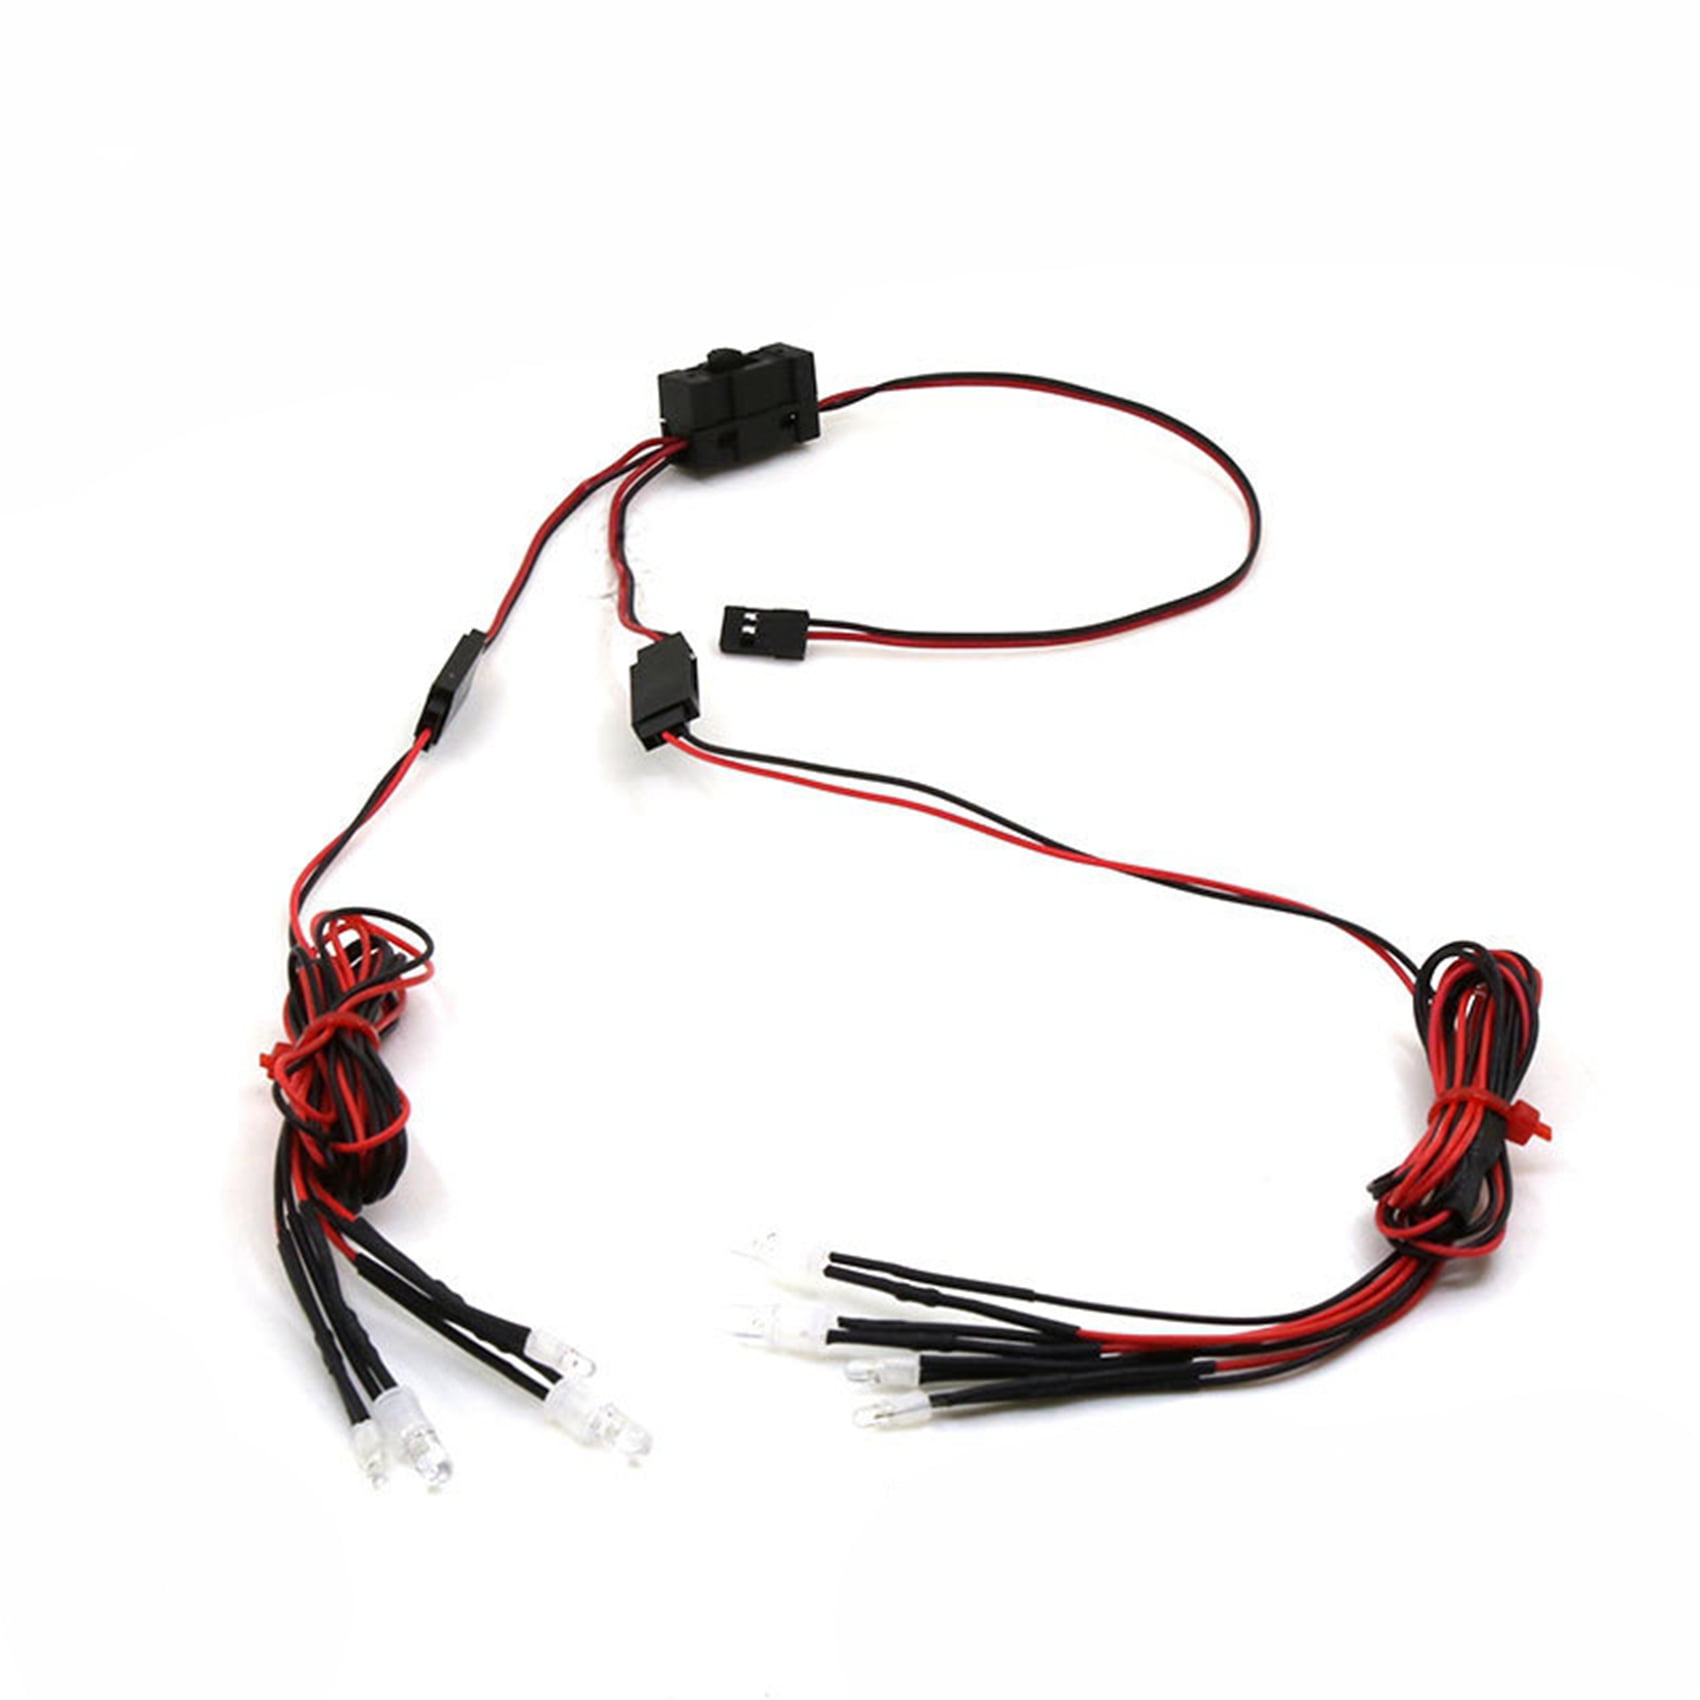 Updated Control Power Switch 1To2 for Rock Crawler Model Car LED Light RC Servo 